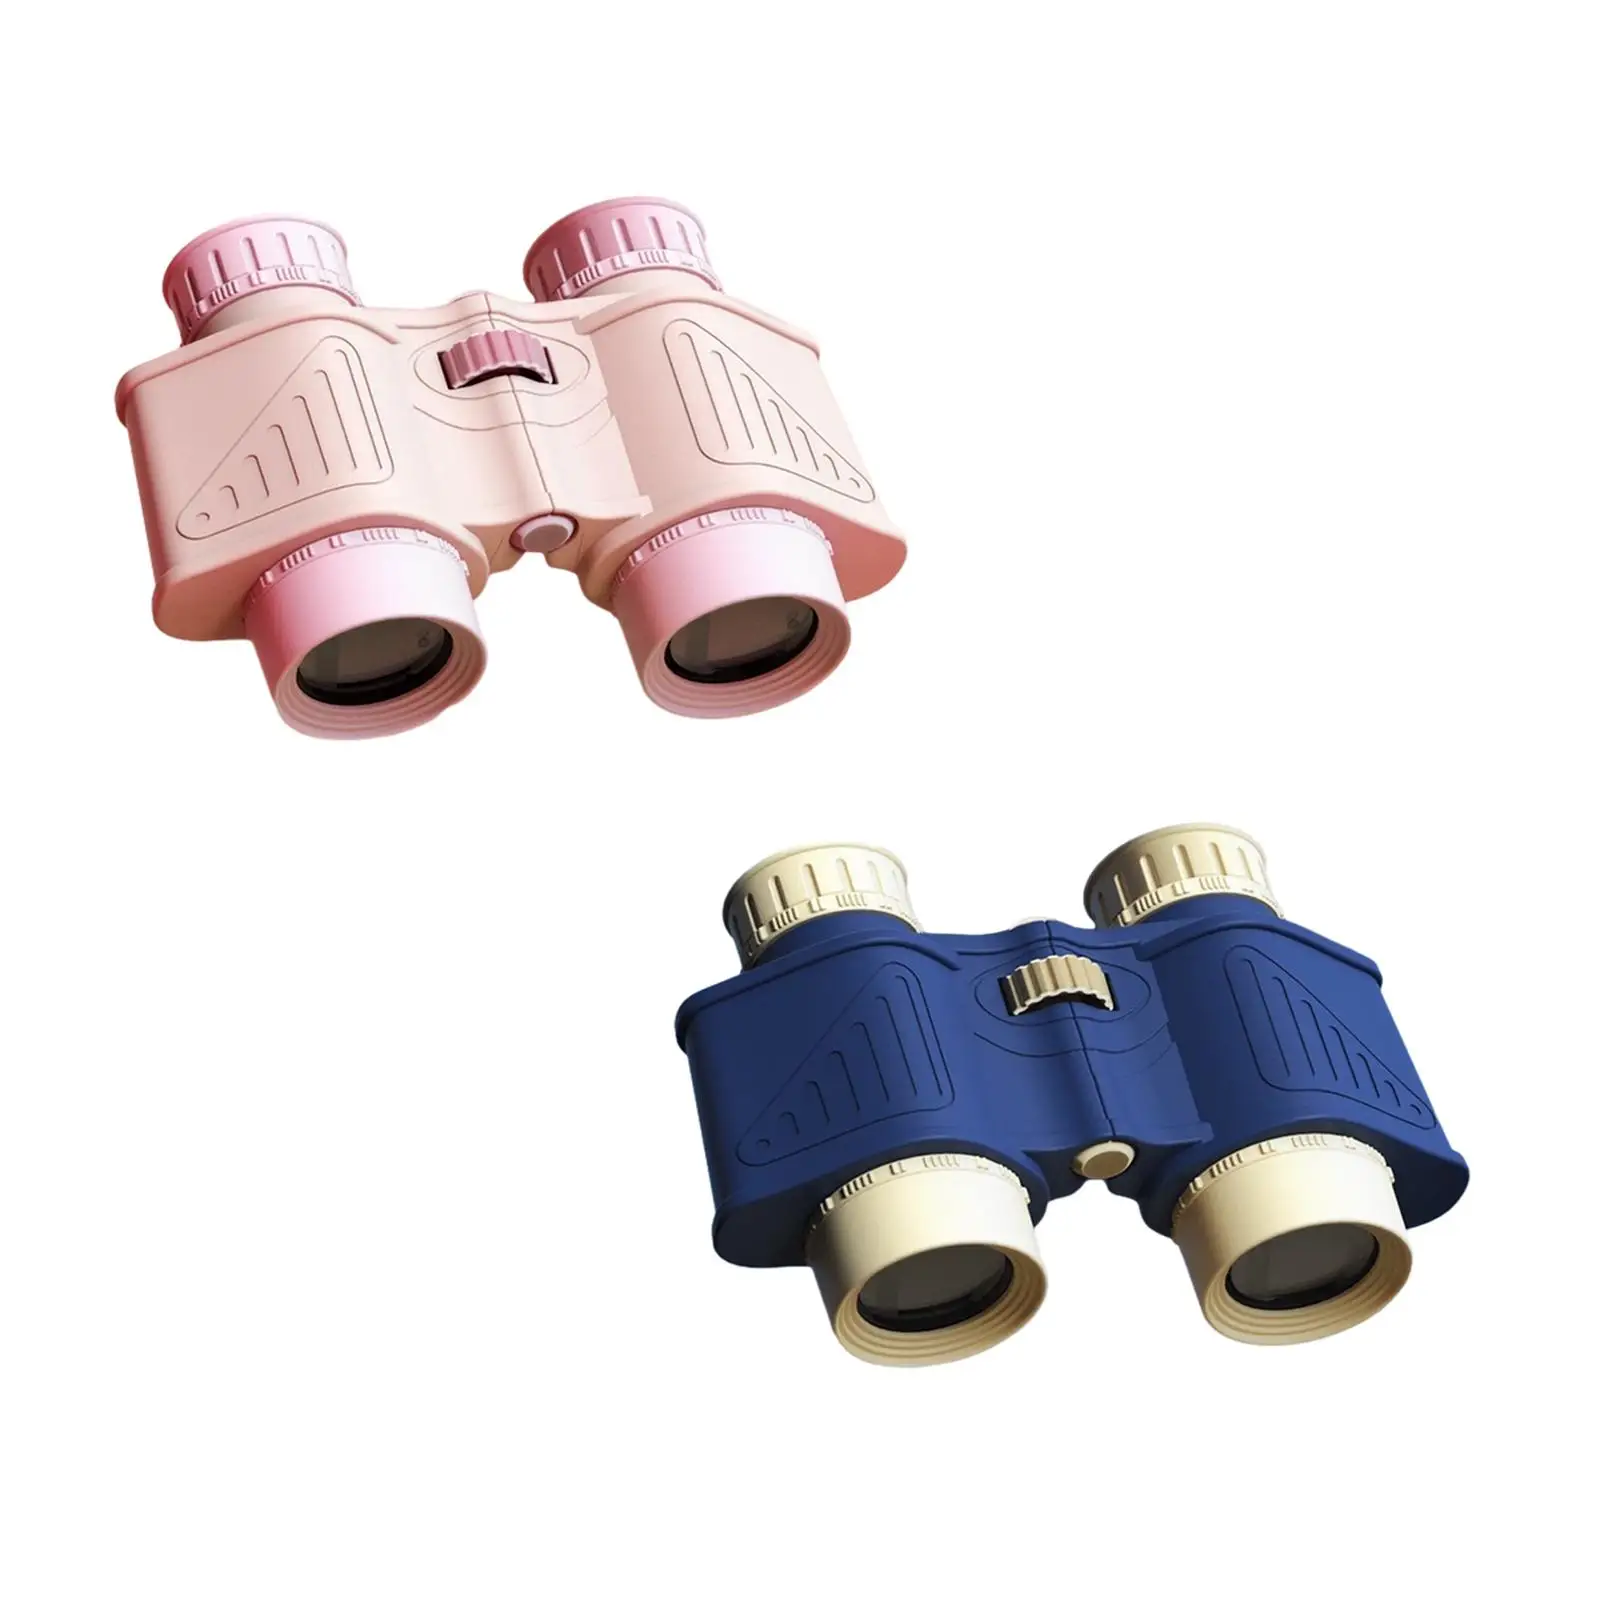 Kids Binoculars Toy Jungle Binoculars for Party Favors Sports Events